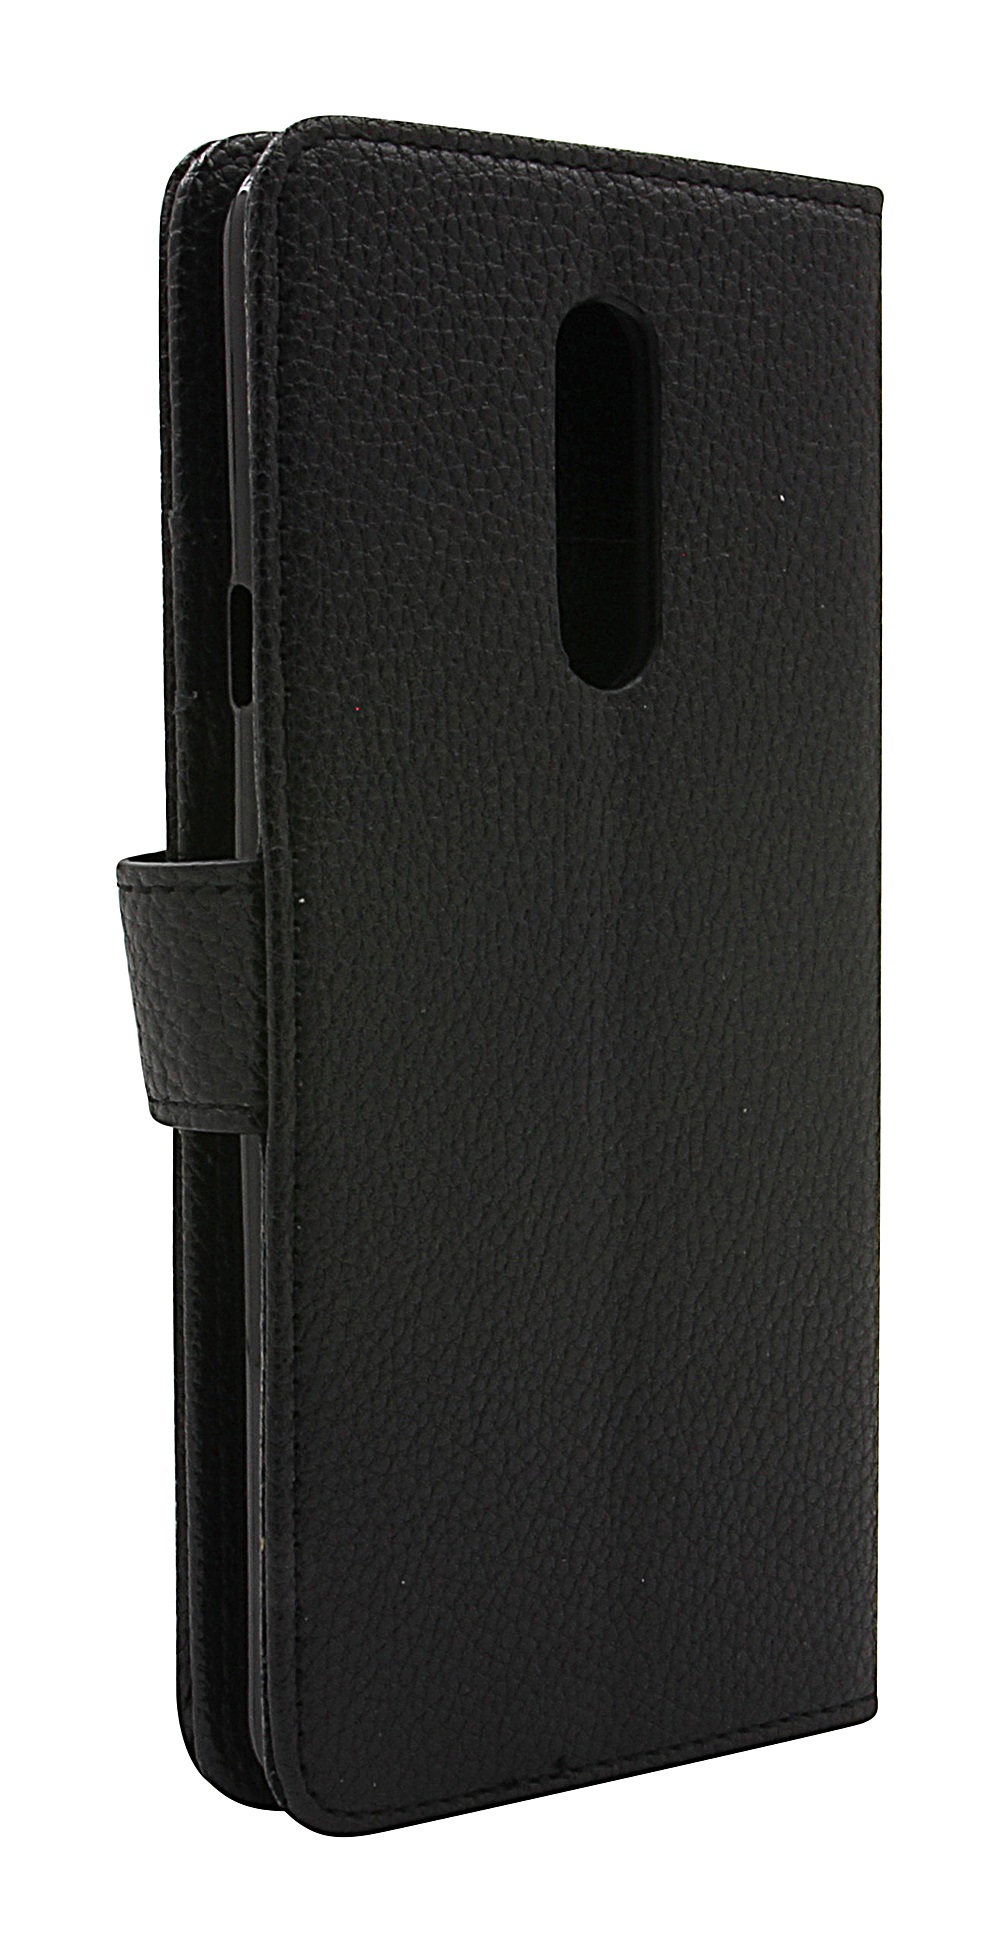 New Standcase Wallet LG G7 Fit (LMQ850)